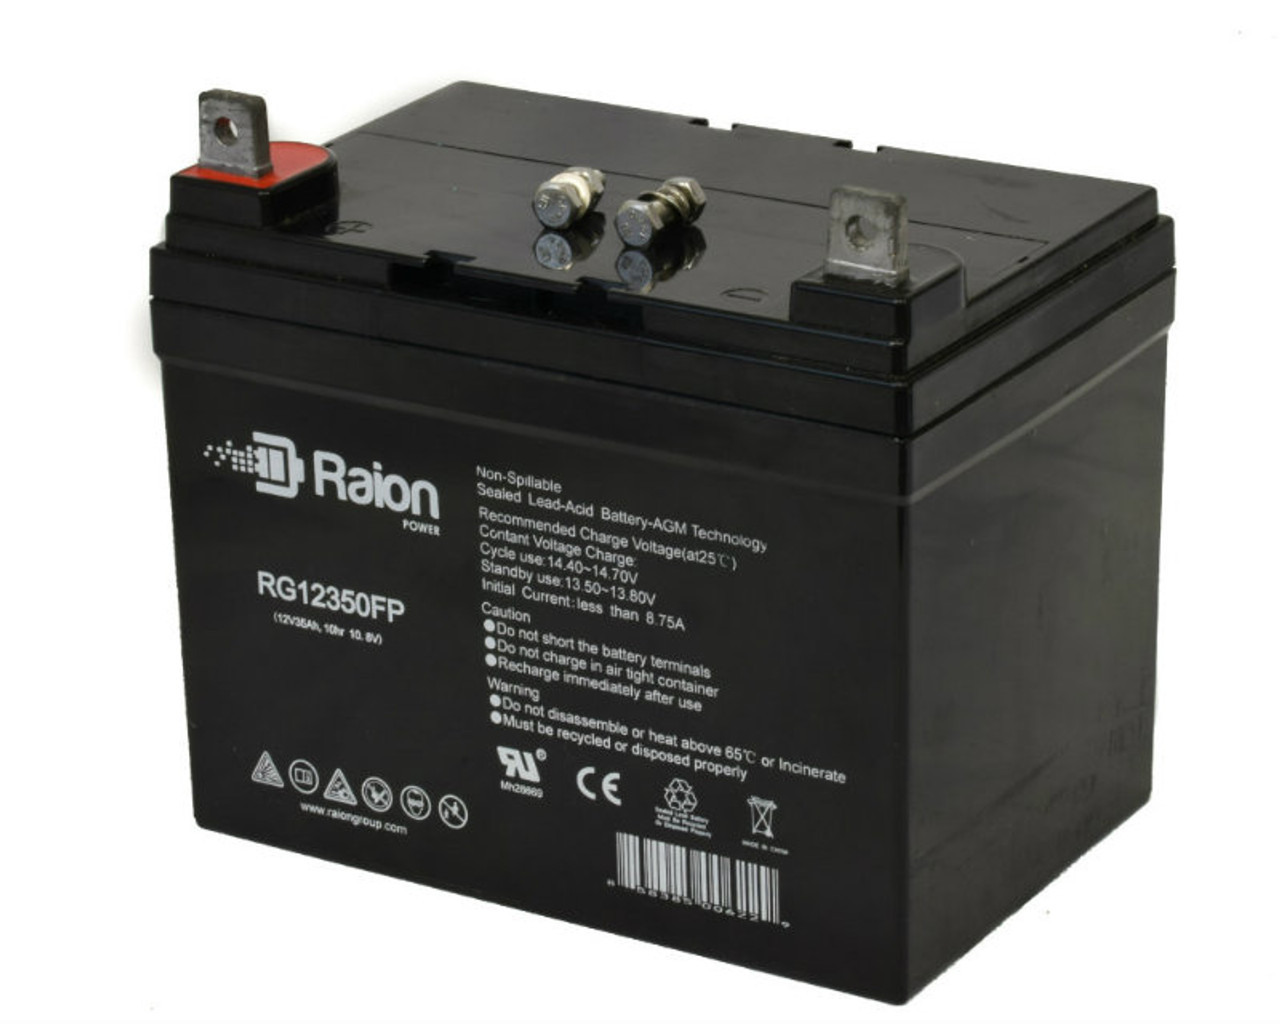 Raion Power Replacement 12V 35Ah RG12350FP Battery for Voeller SS-7